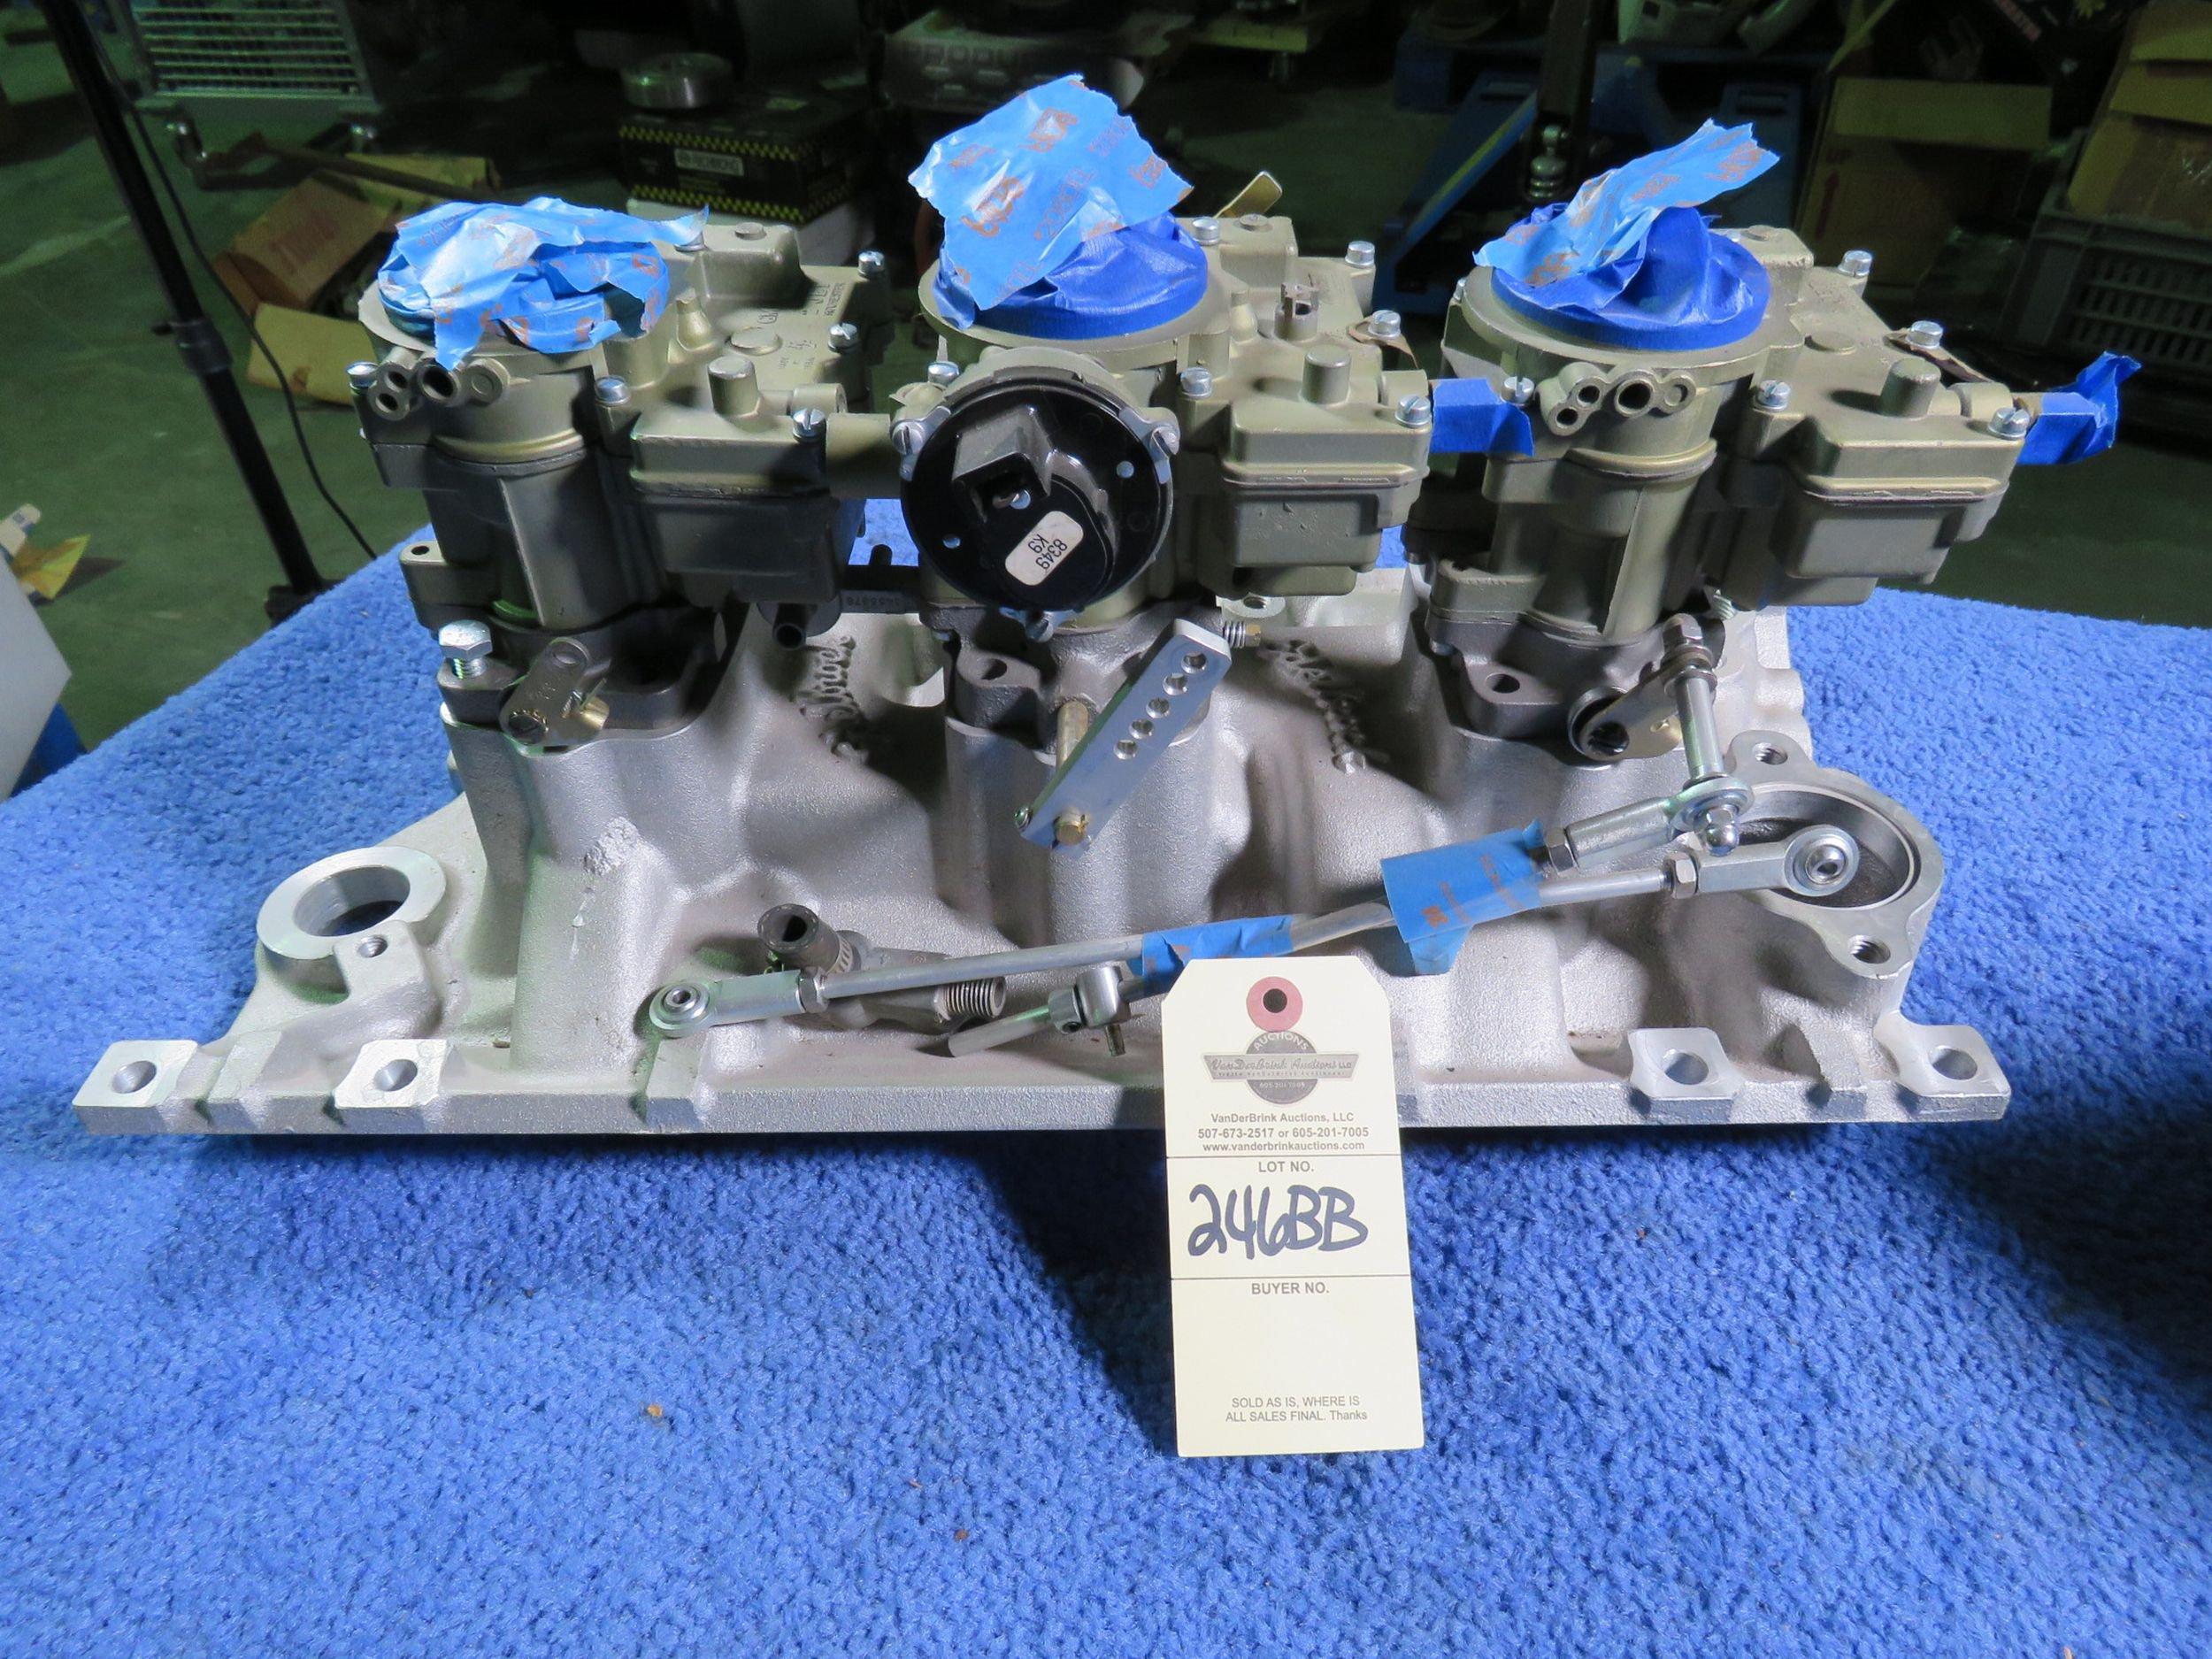 Tri-Power with Edelbrock Intake and Rochester Carbs